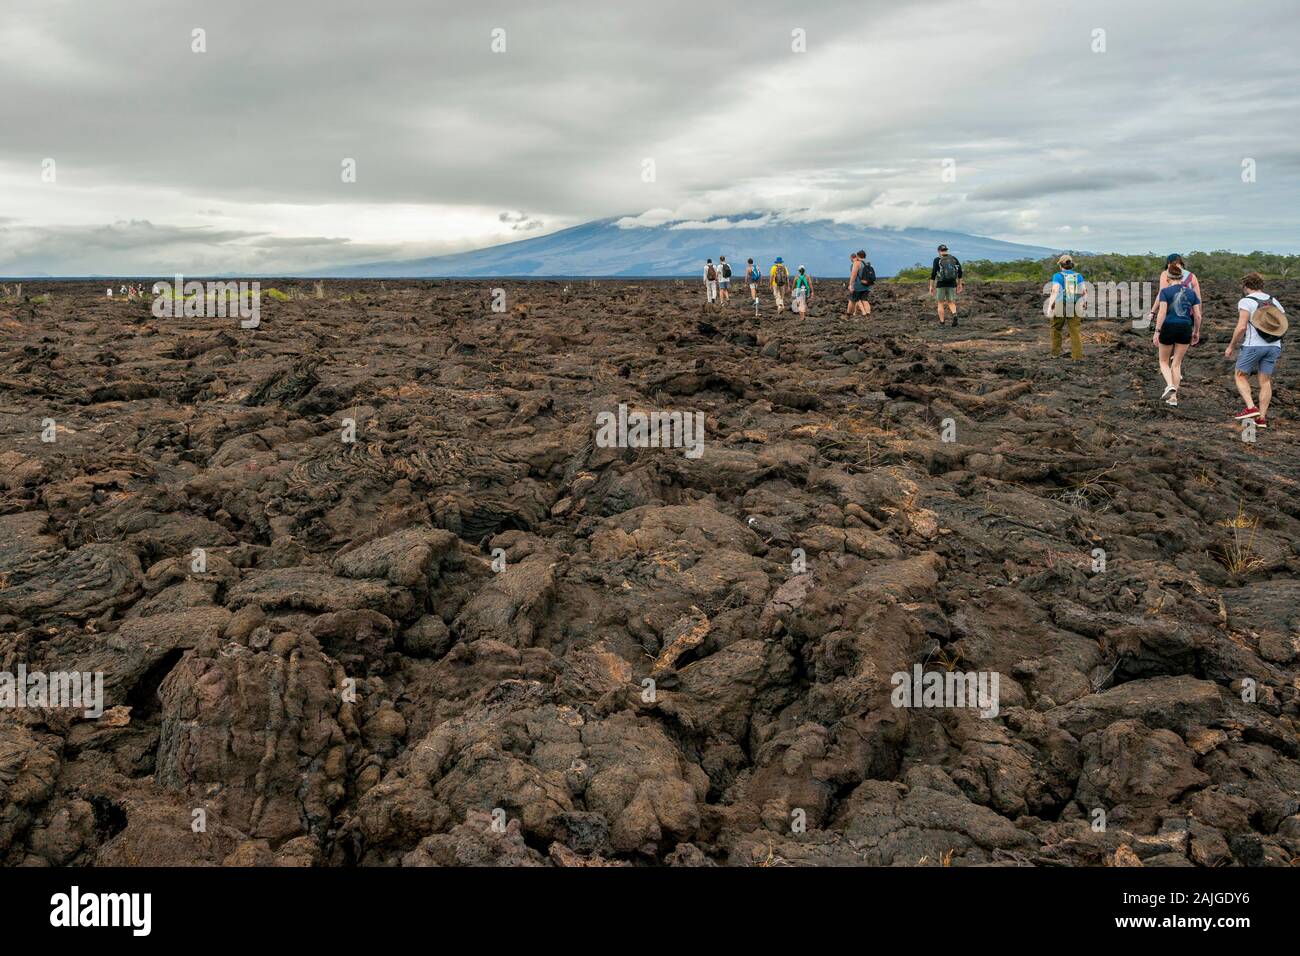 Tourists walking on the volcanic landscape at Punta Moreno on Isabela island, Galapagos, Ecuador. The Cerro Azul volcano is in the background. Stock Photo